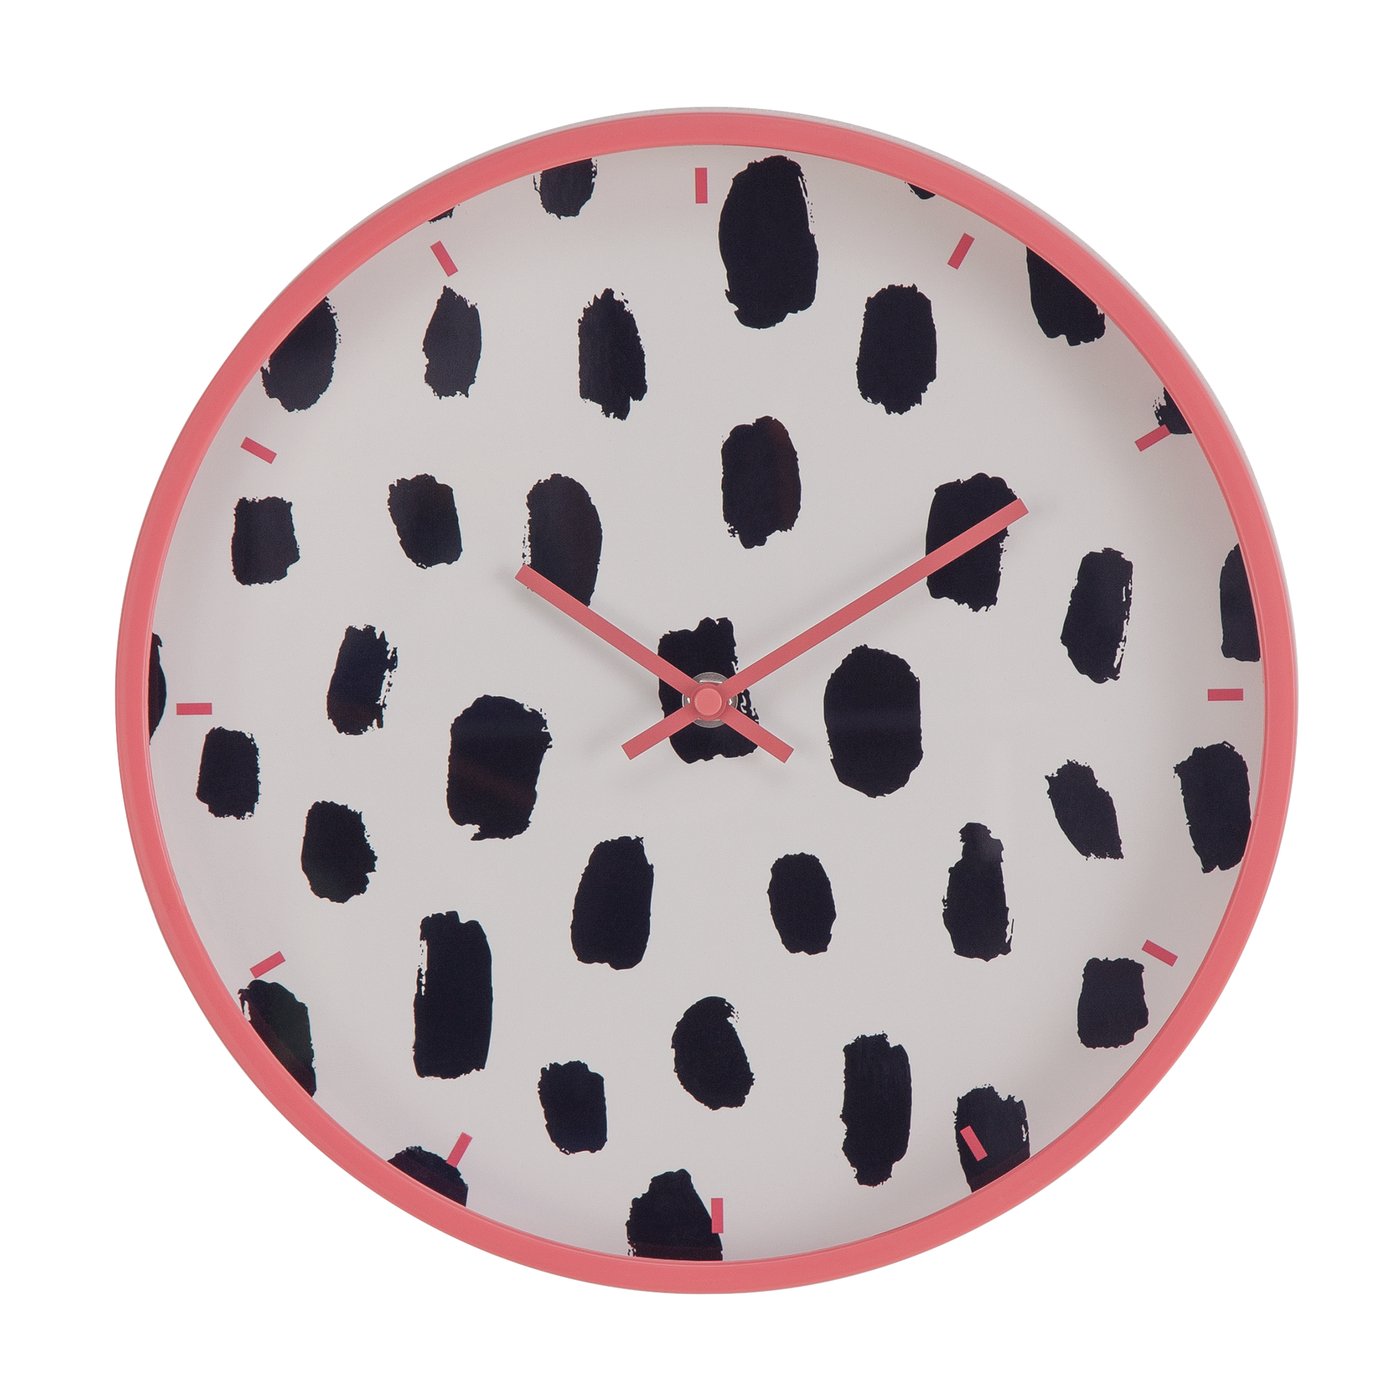 Argos Home Novelty Wall Clock Review